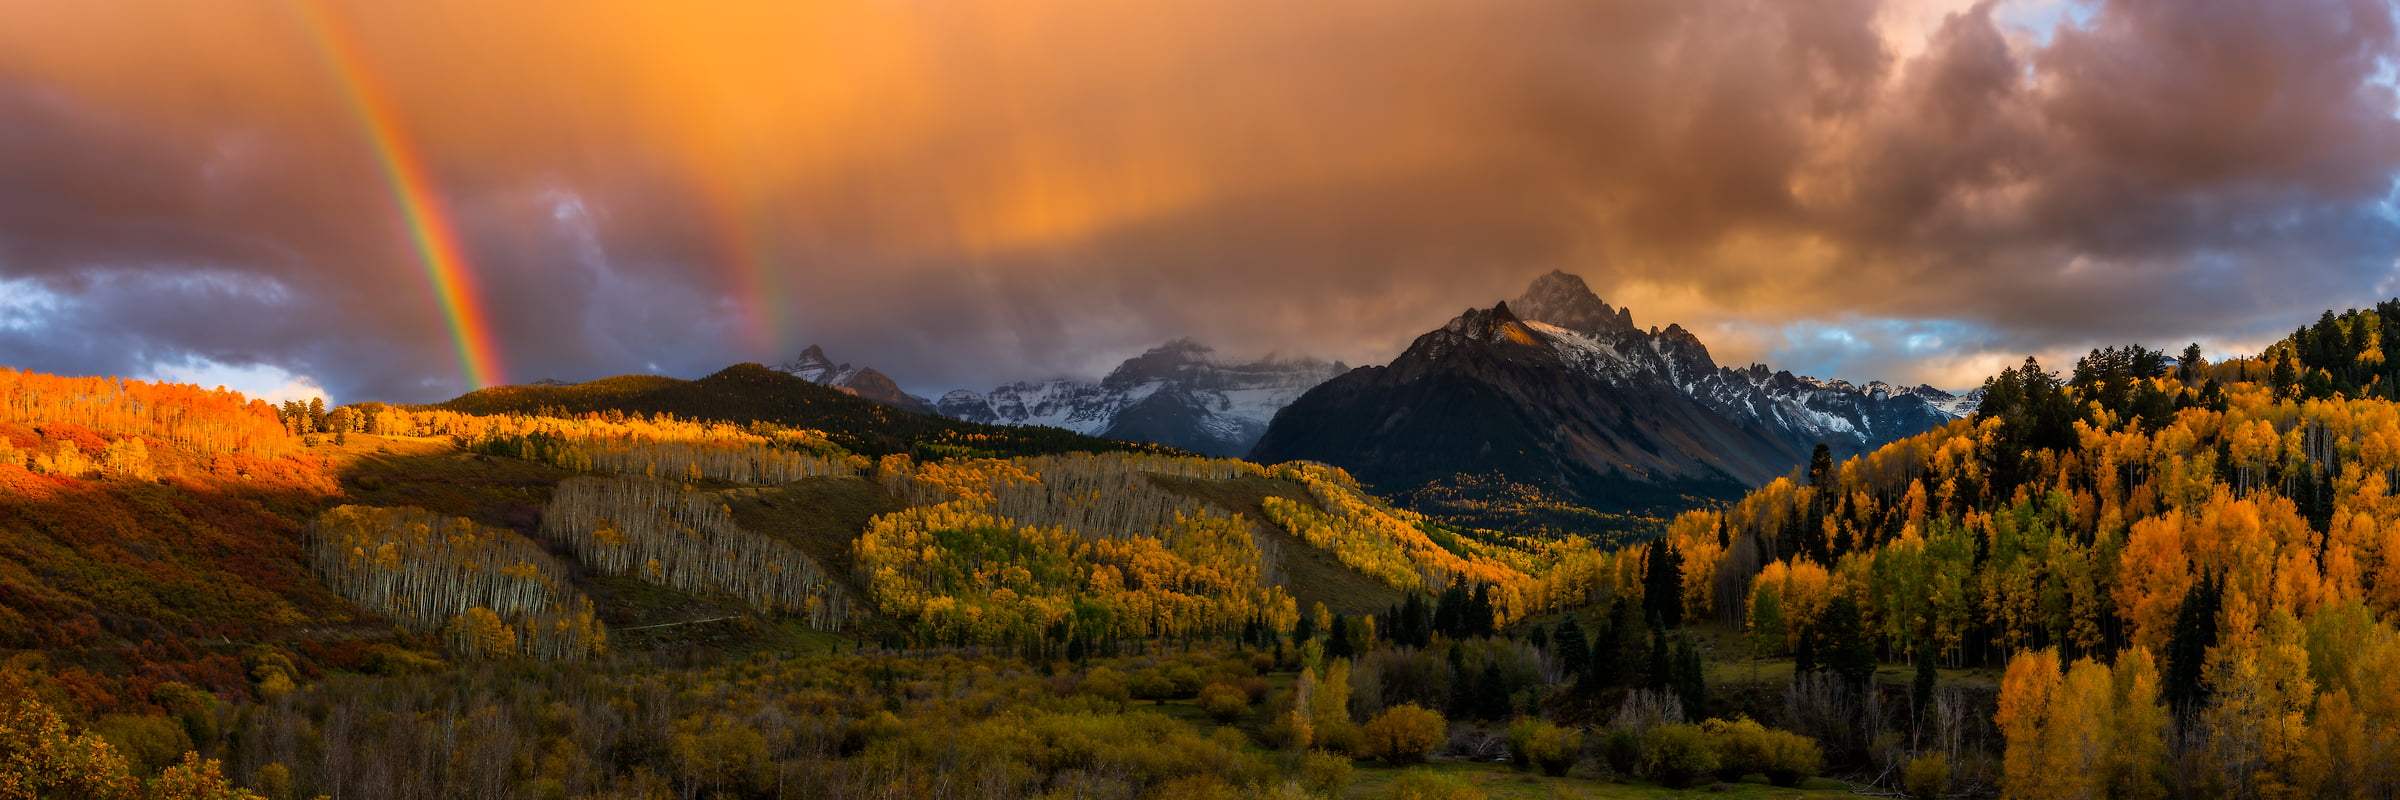 101 megapixels! A very high resolution, large-format VAST photo print of a mountain landscape with a rainbow; landscape photograph created by Phillip Noll in Ridgway, Colorado.